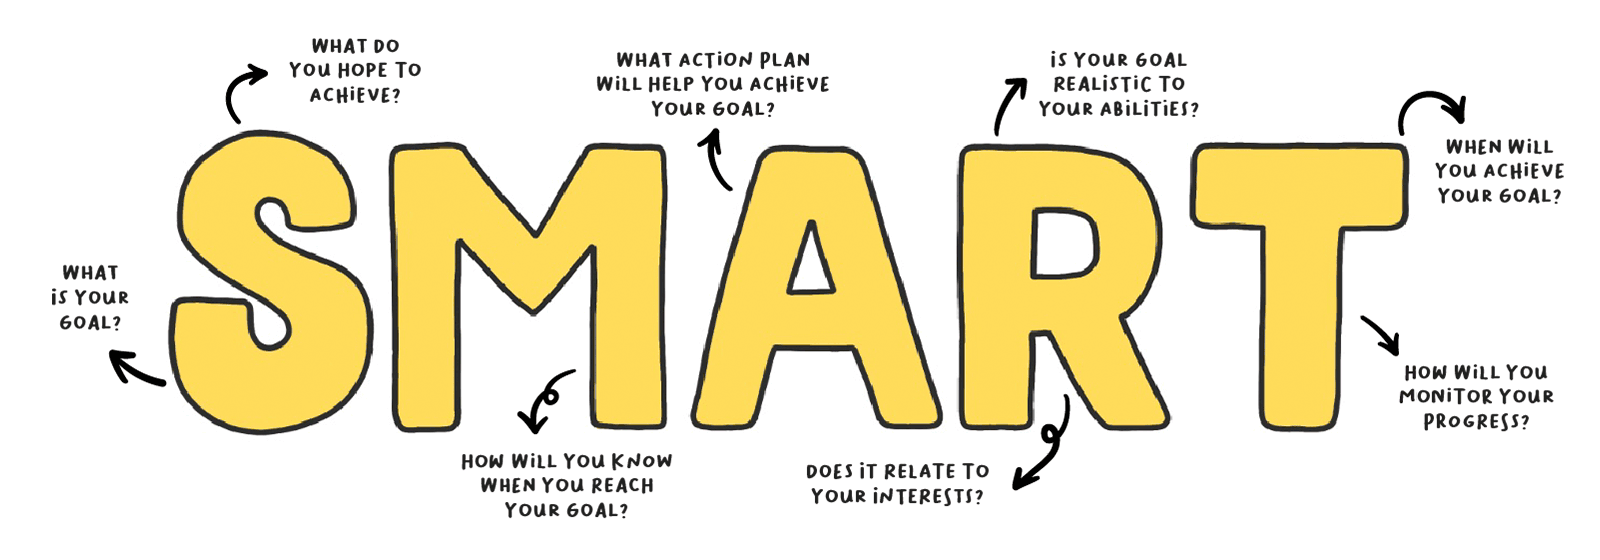 Smart Goals - Putting A Growth Mindset Into Practice | We The Differents